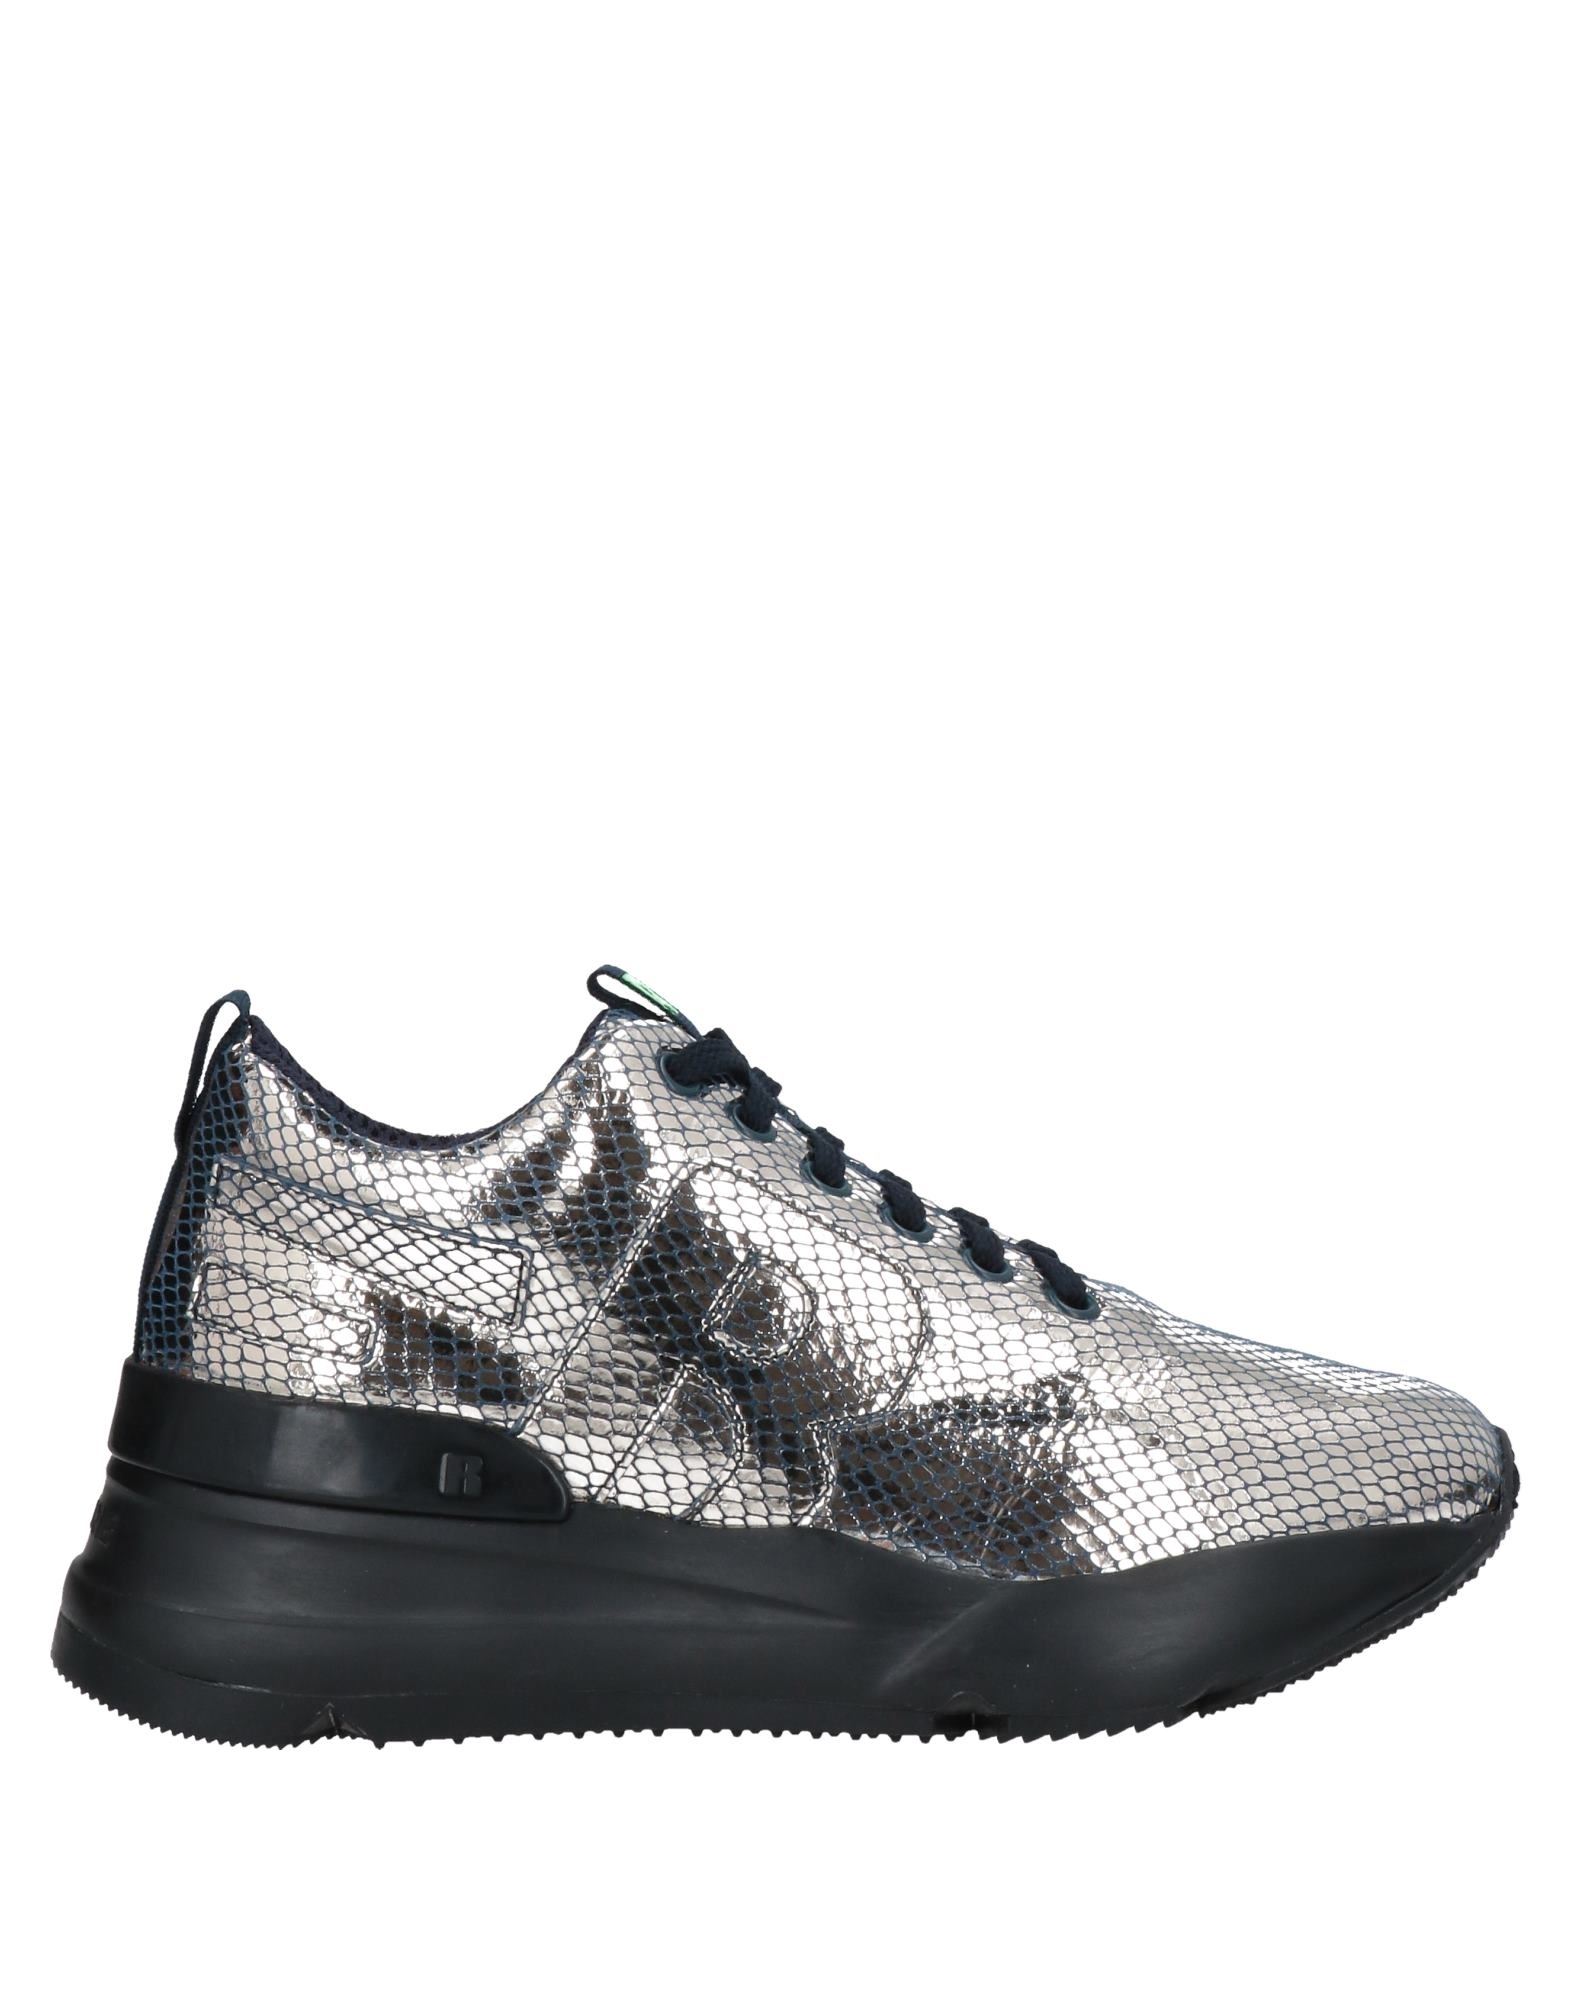 Rucoline Sneakers In Grey